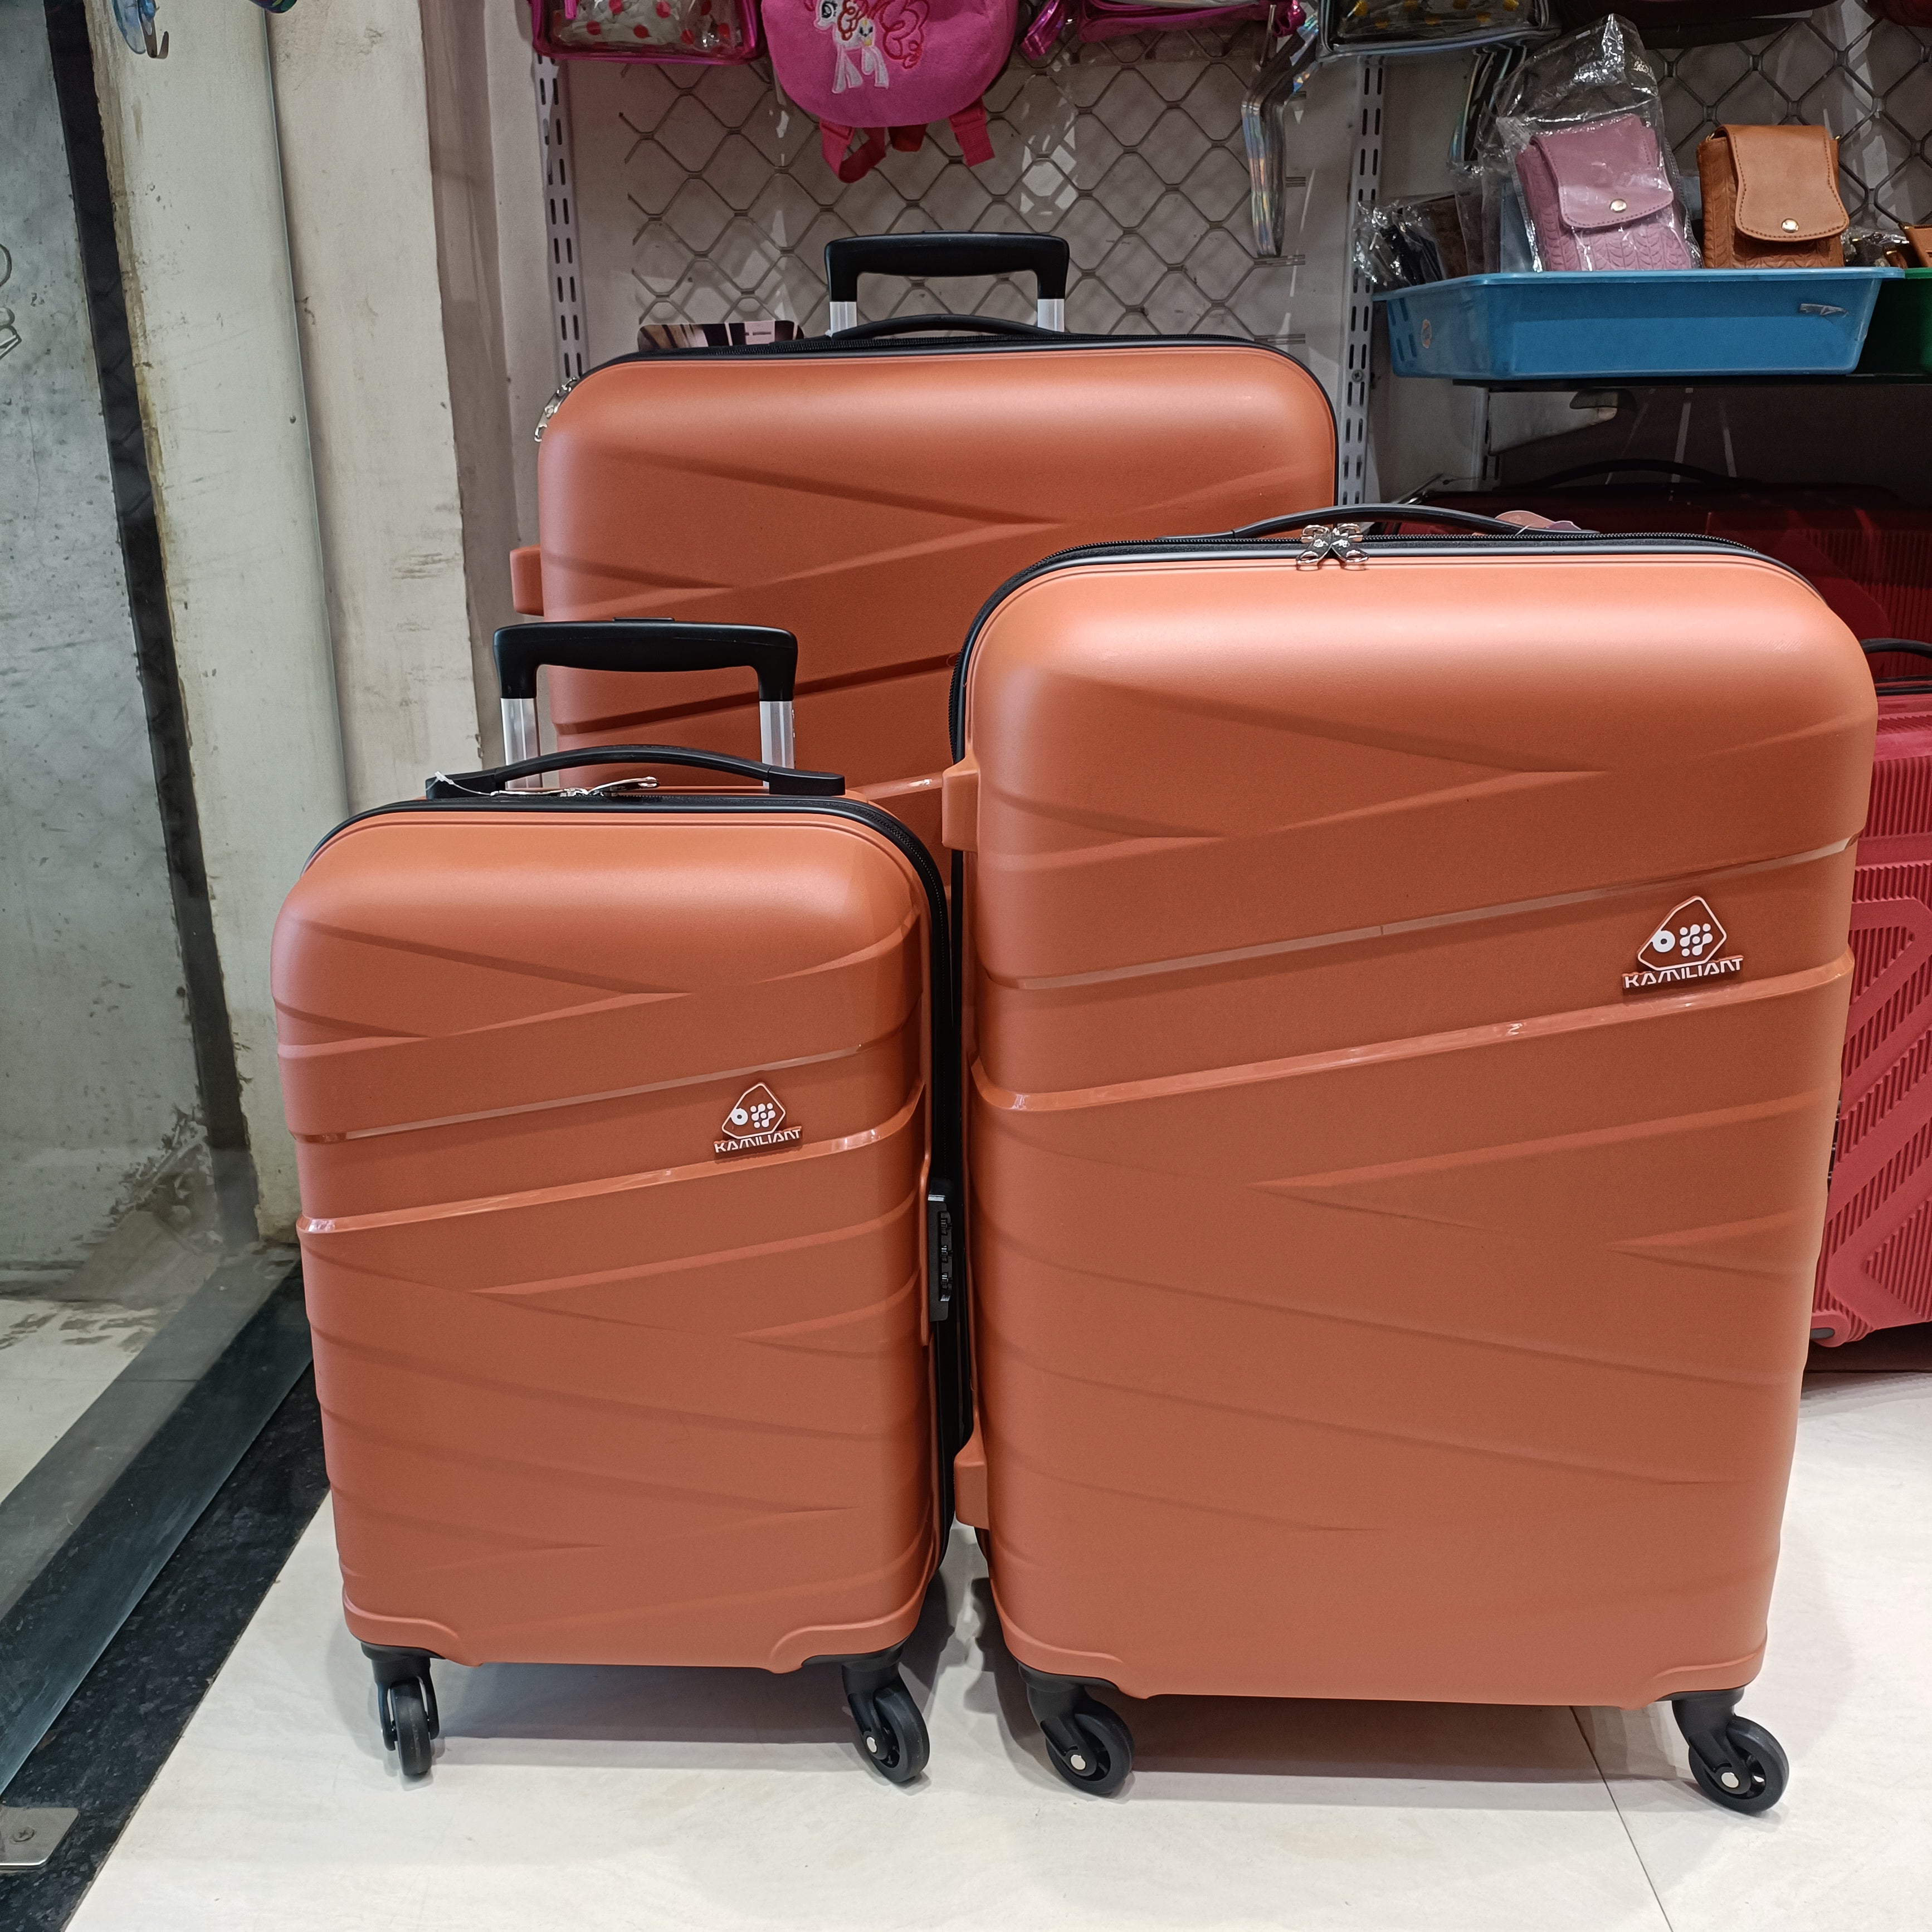 Kamiliant KAMI 3608 Blue Hand Luggage Bag in Chandigarh at best price by  Samsonite Showroom - Justdial